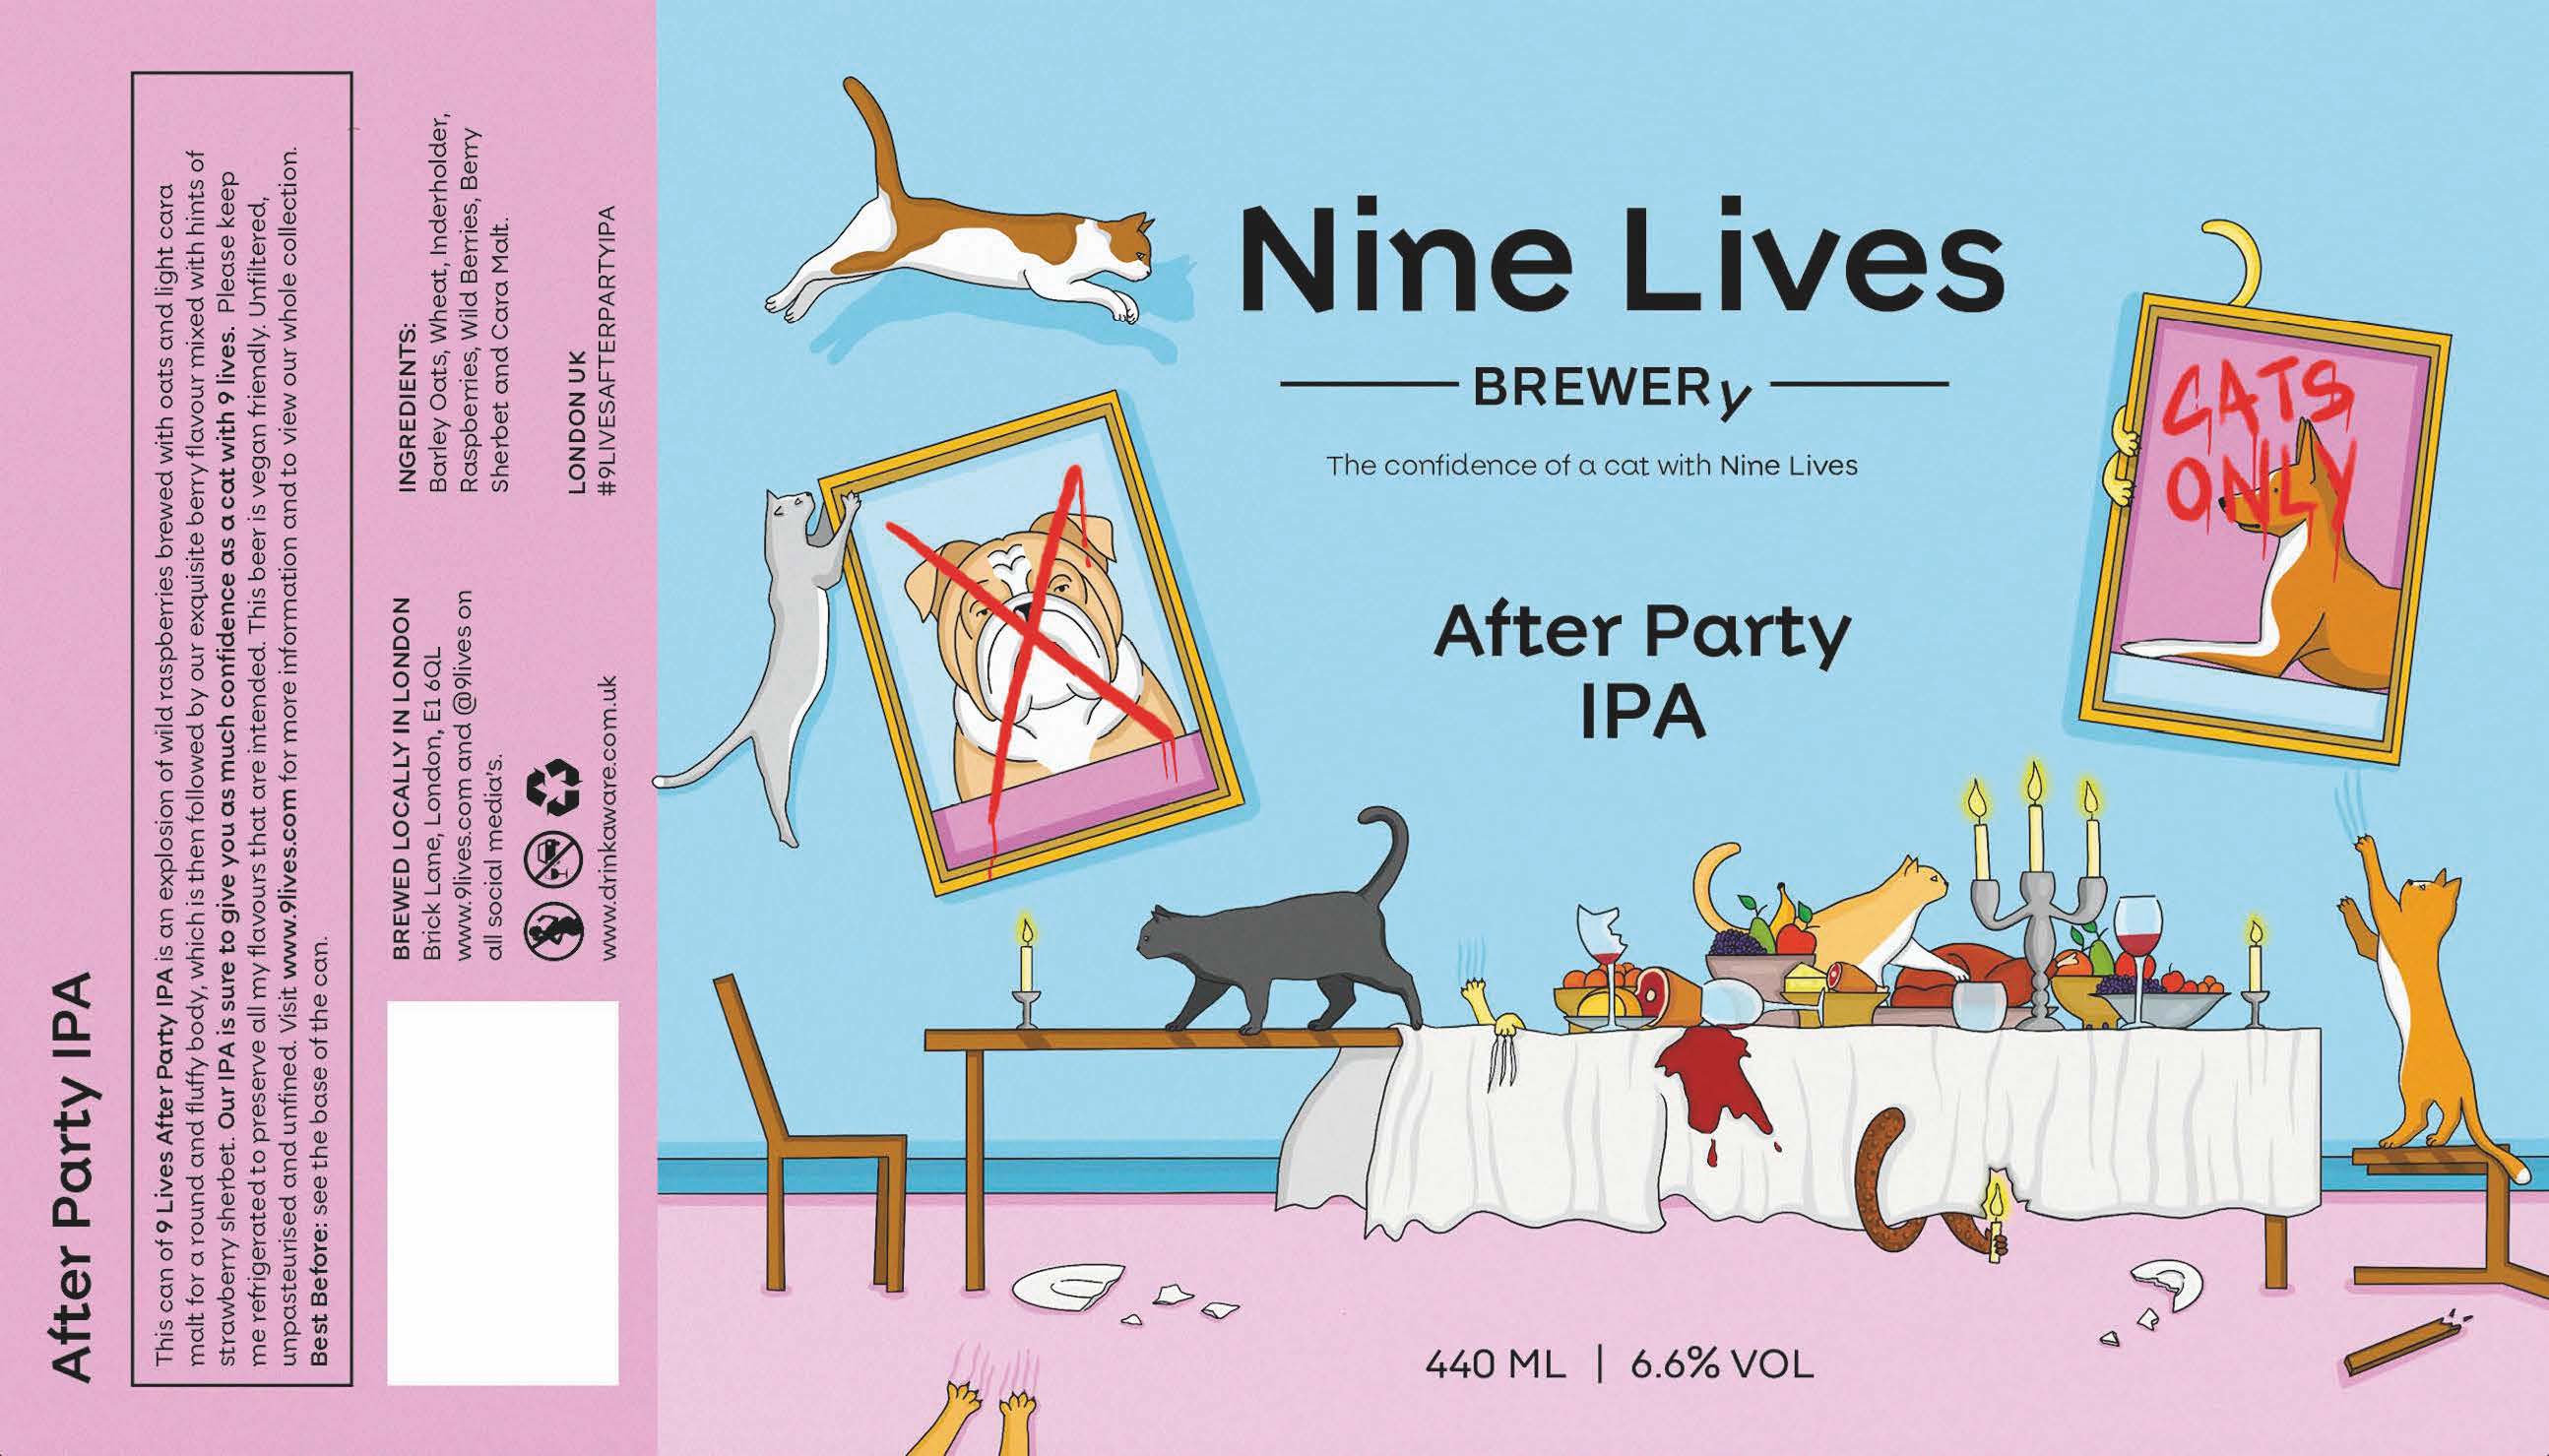 Craft Beer label design by Ben Dale with a playful design showcasing cats with nine lives.